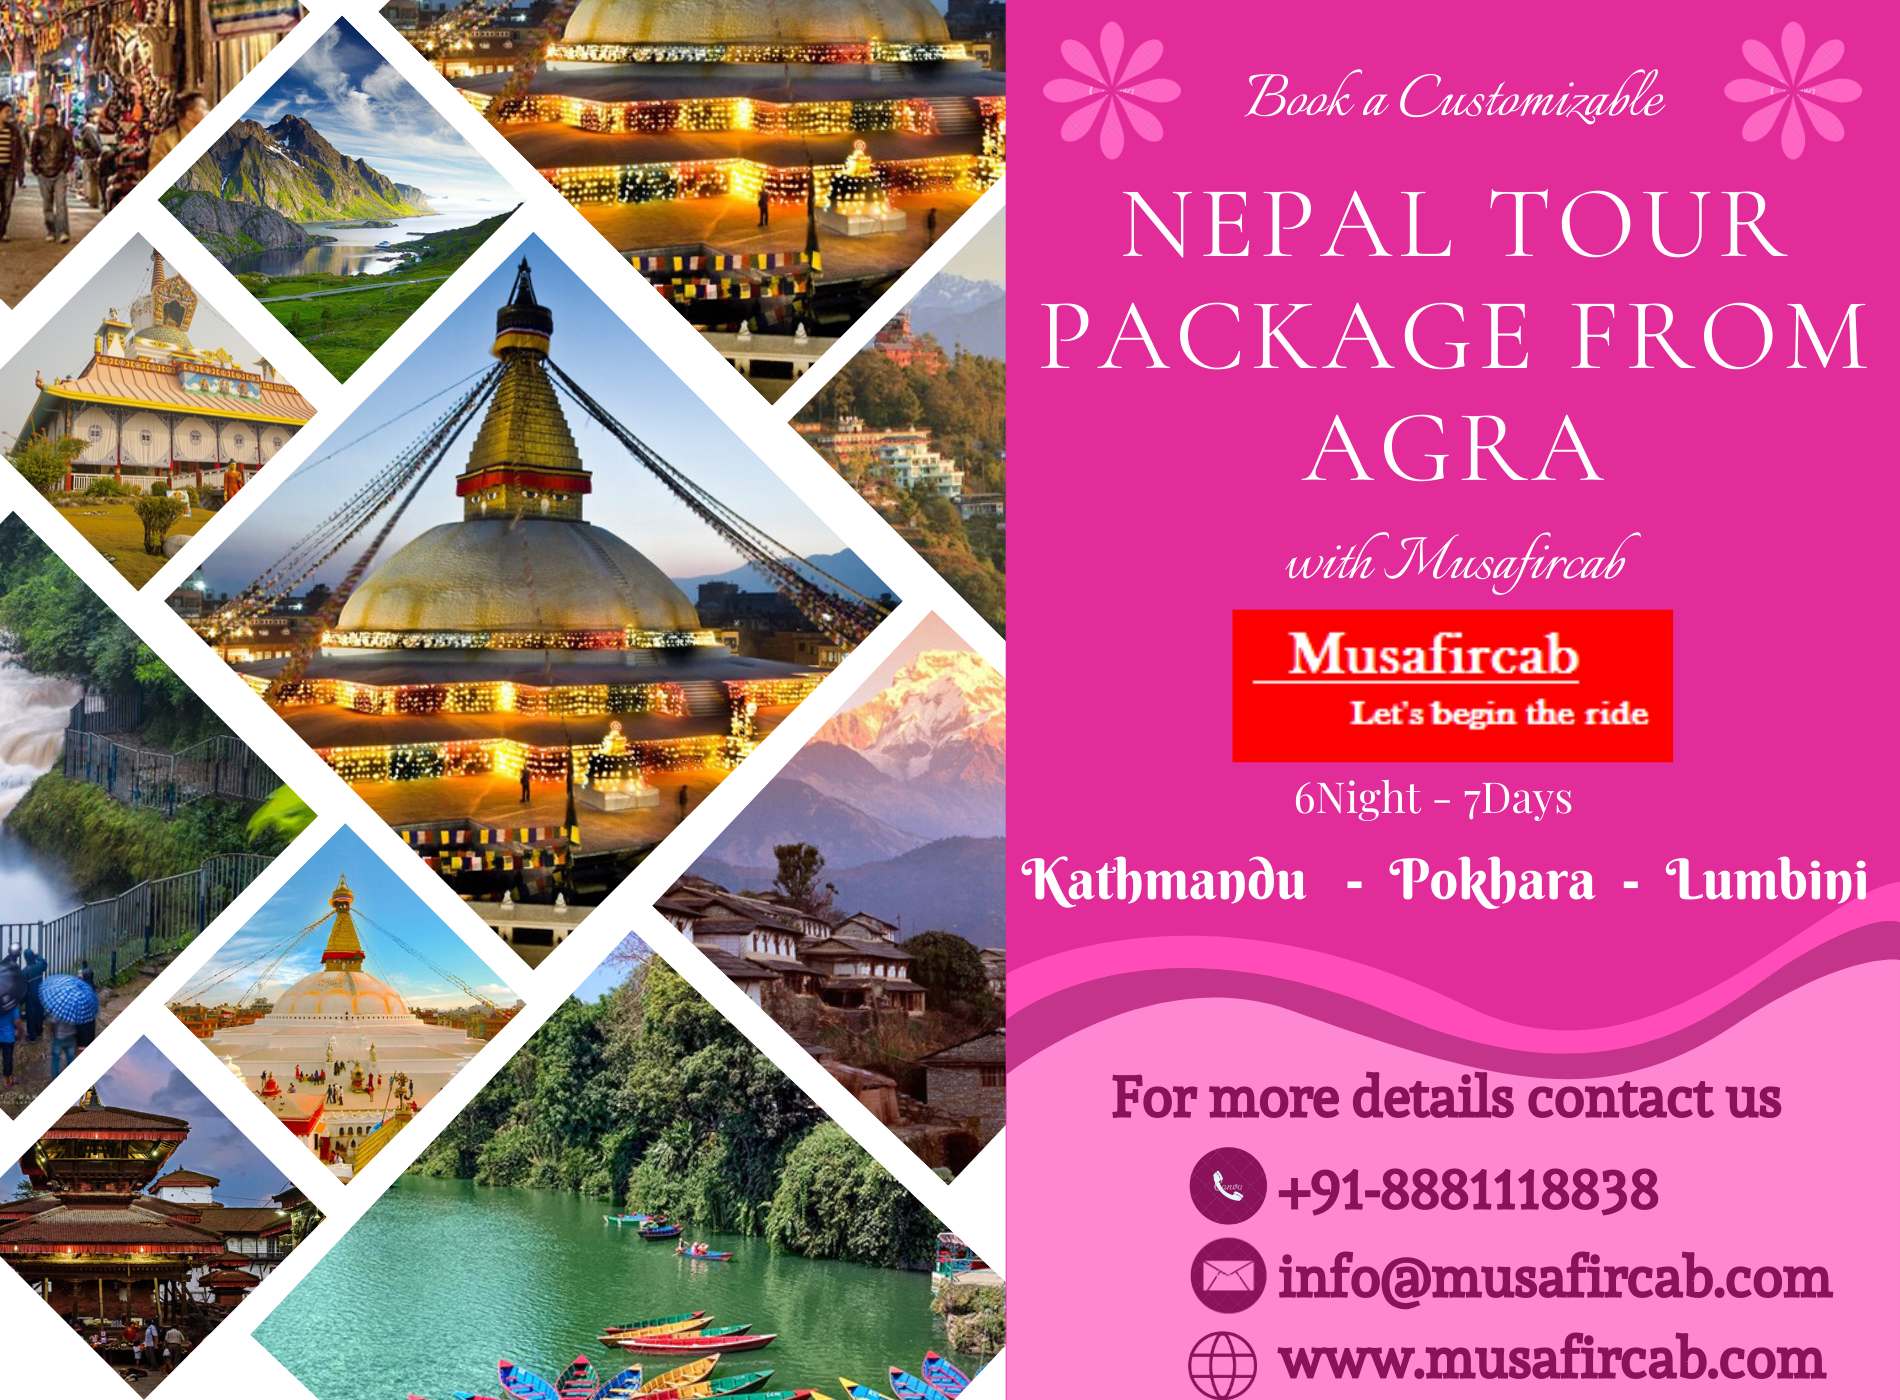 Nepal Tour Package from Agra